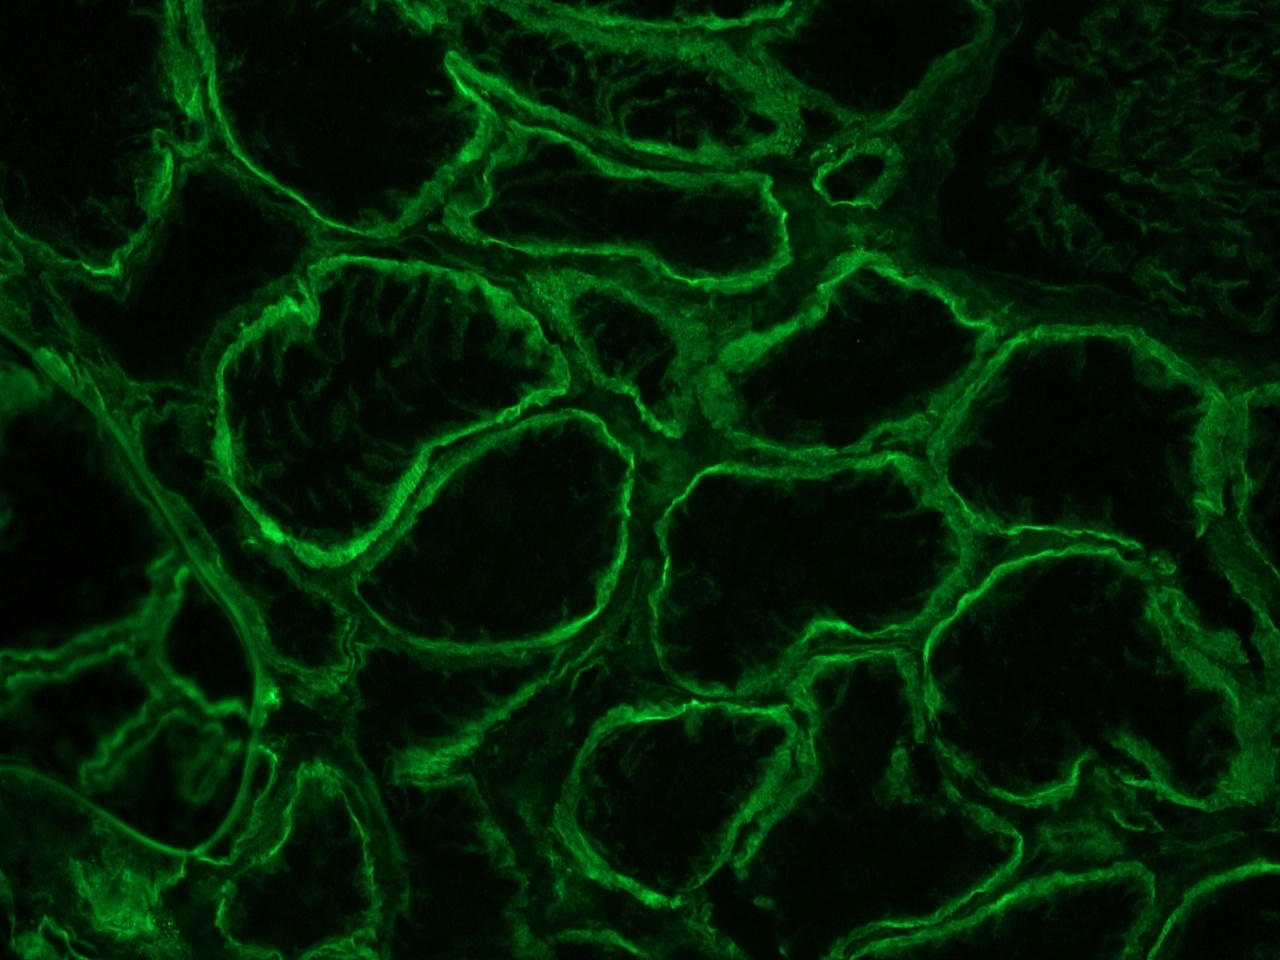 Figure 3: Integrin alpha 6A immunostaining of the basolateral membrane of epithelial cells in a frozen section of human kidney using MUB0908P.